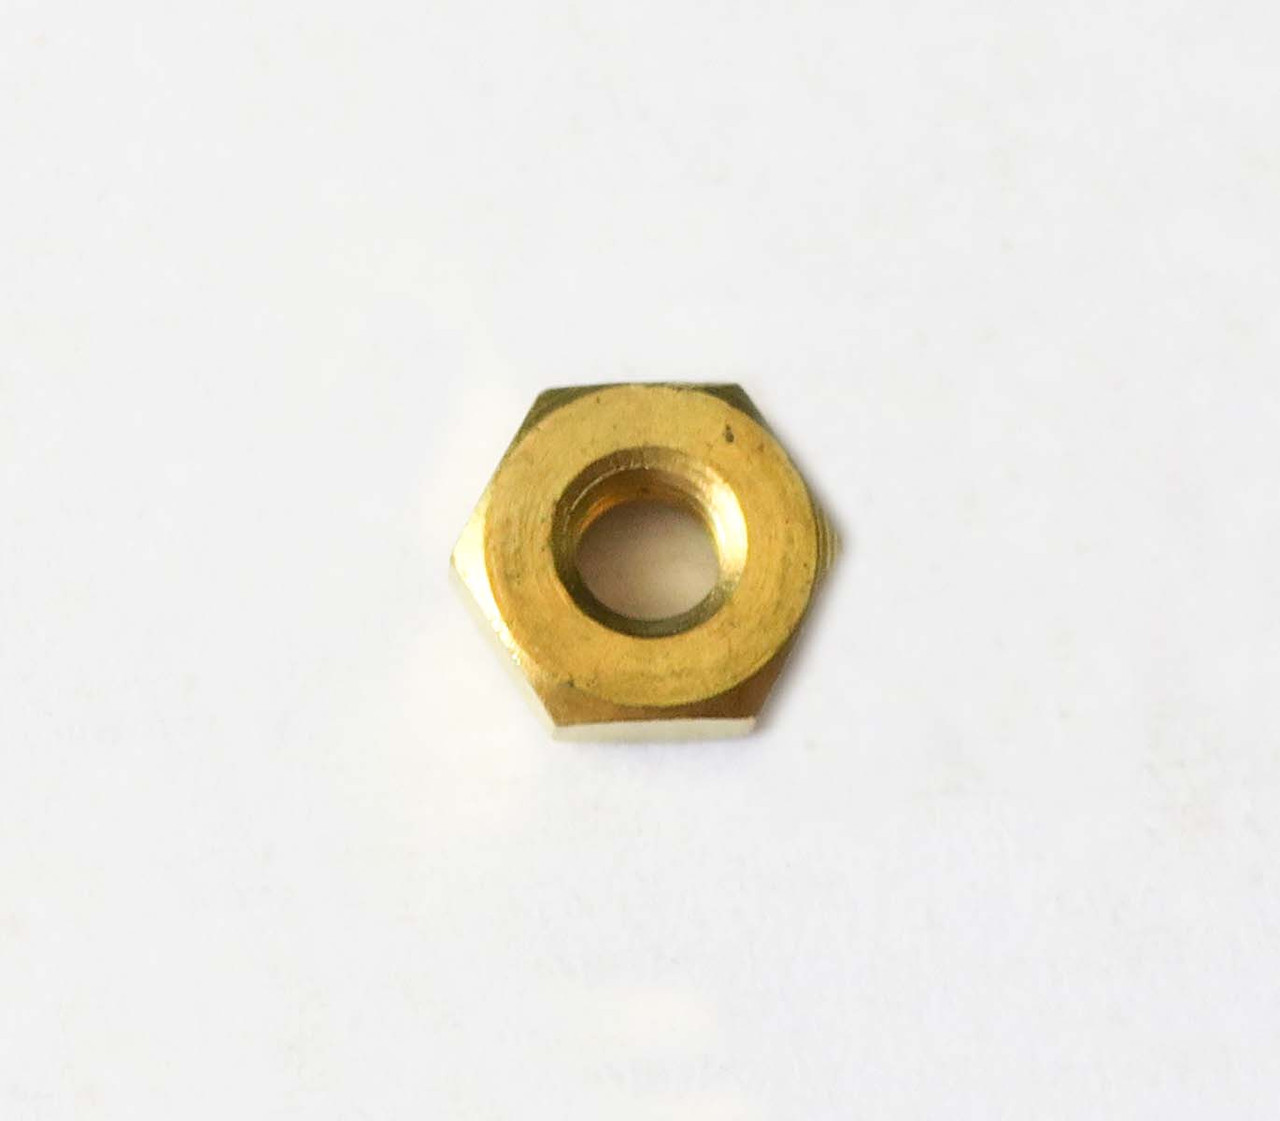 HERMLE POST HEX NUT (H-6)